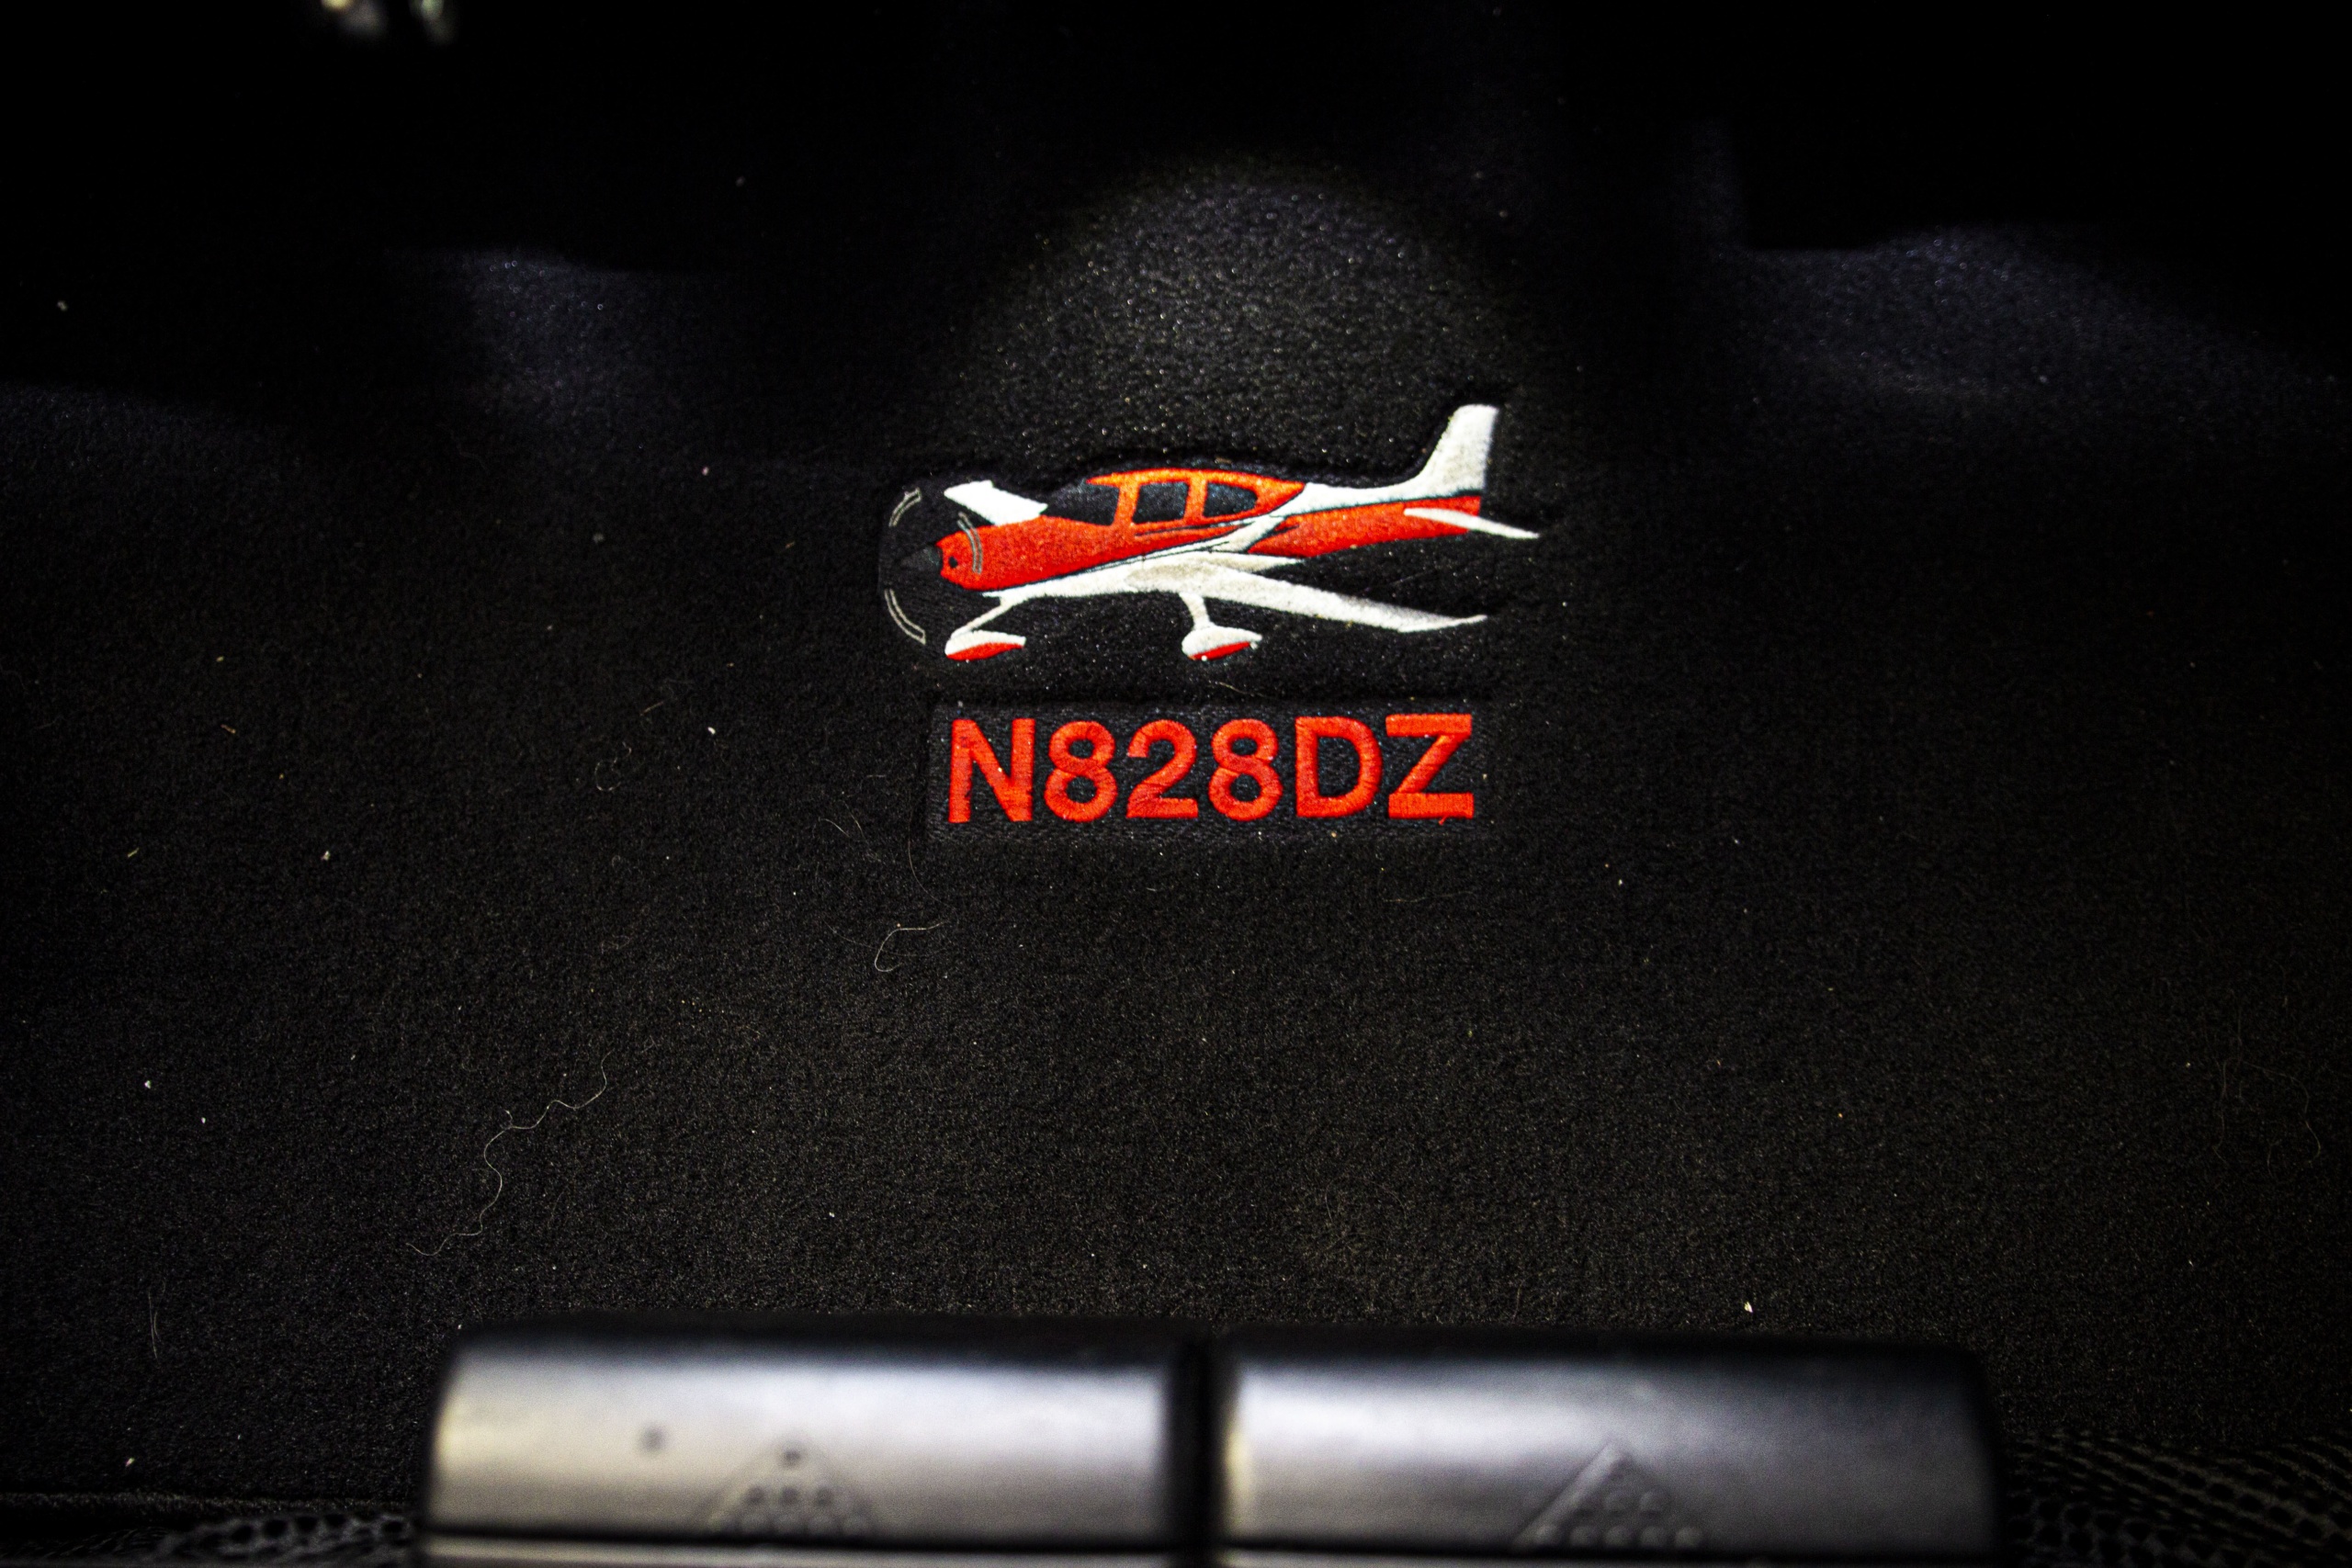 The comfy interior of N828DZ, our Cirrus SR22Turbo Airplane, makes you and your passengers feel at ease.